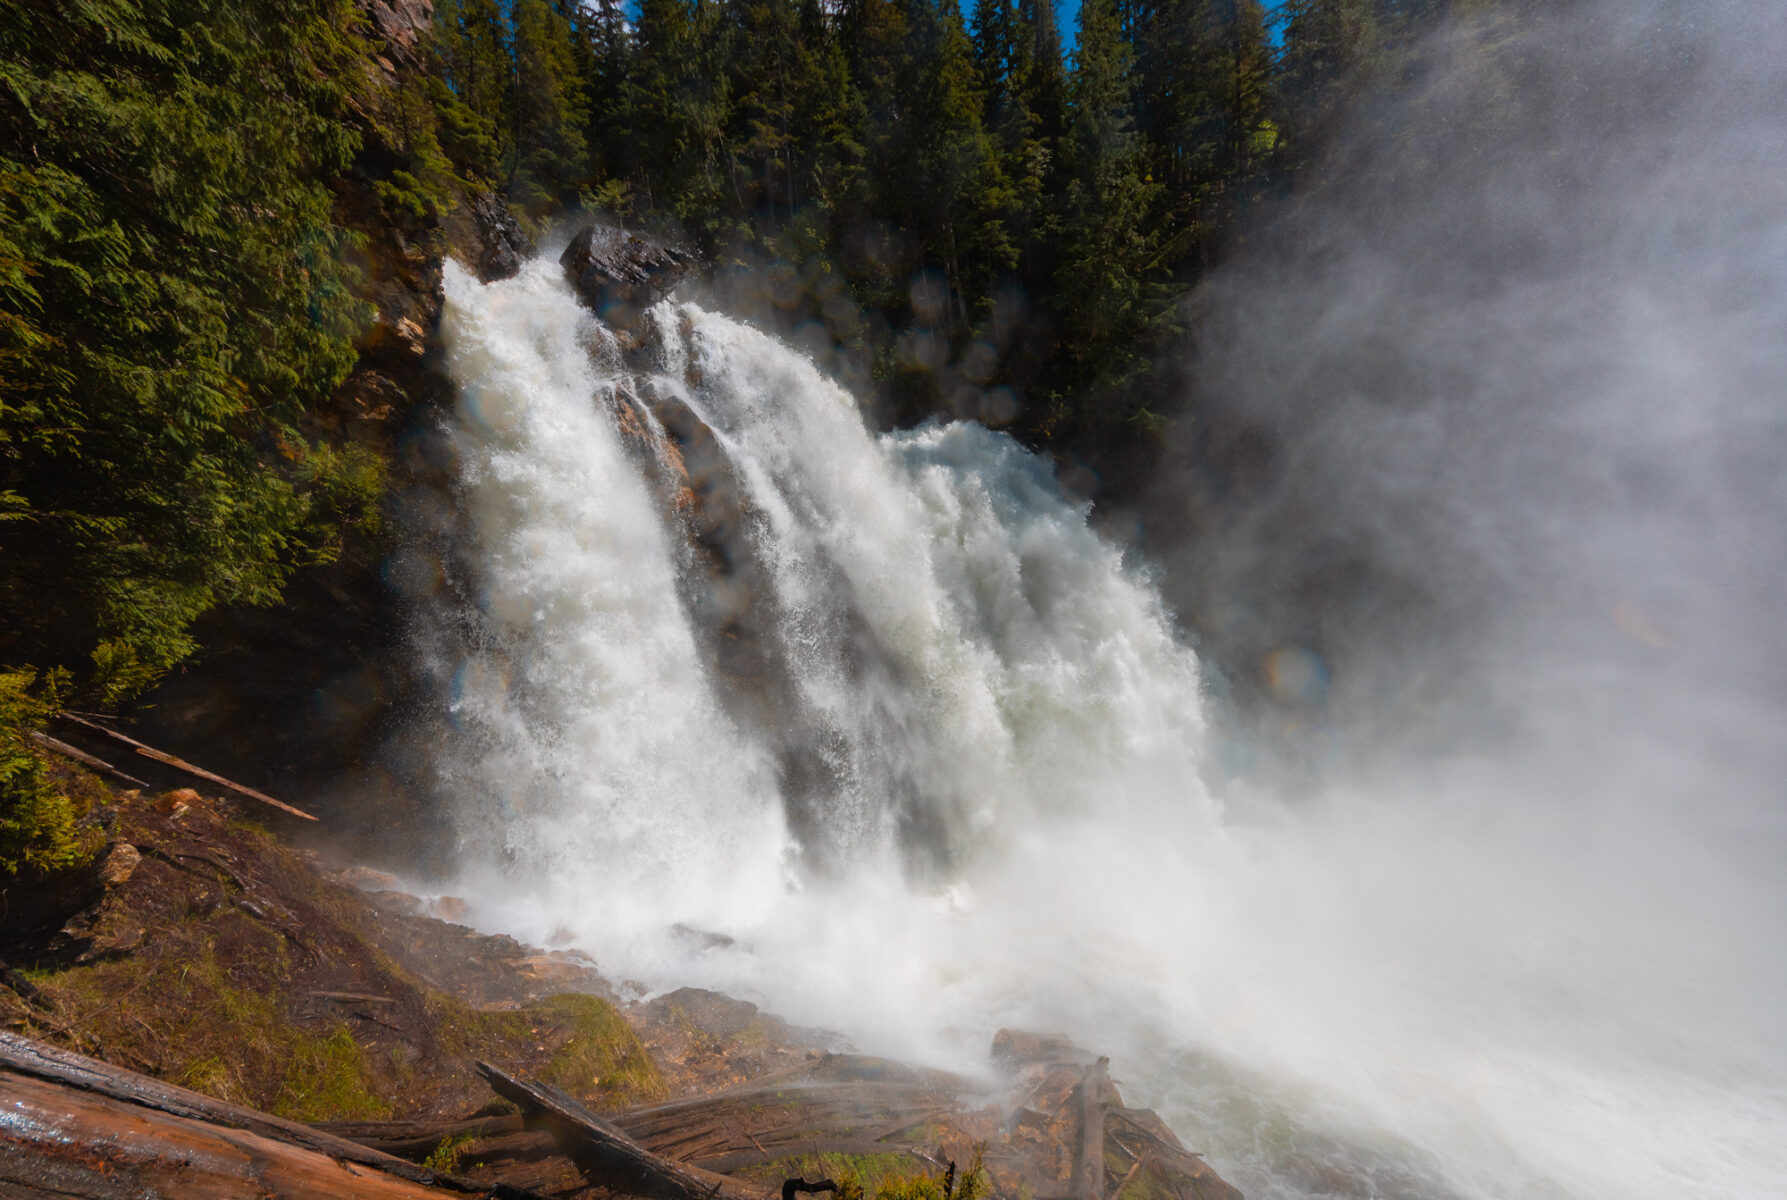 Water tumbles over Rainbow Falls in Monashee Provincial Park near Cherryville, BC